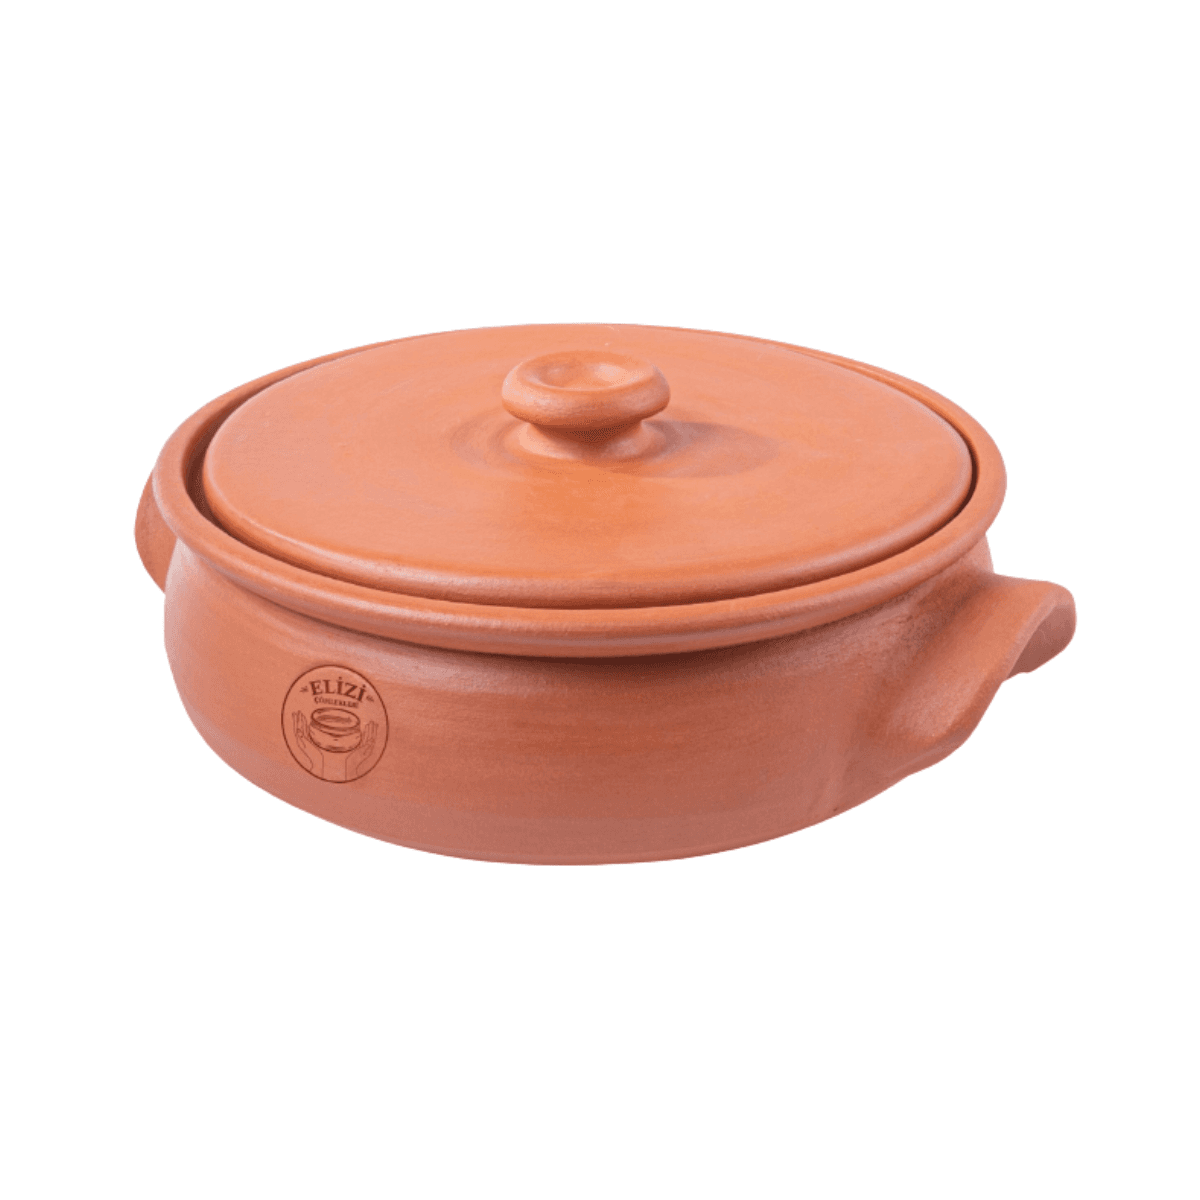 Elizi Clay Lined Pan 27 cm Brown Clay